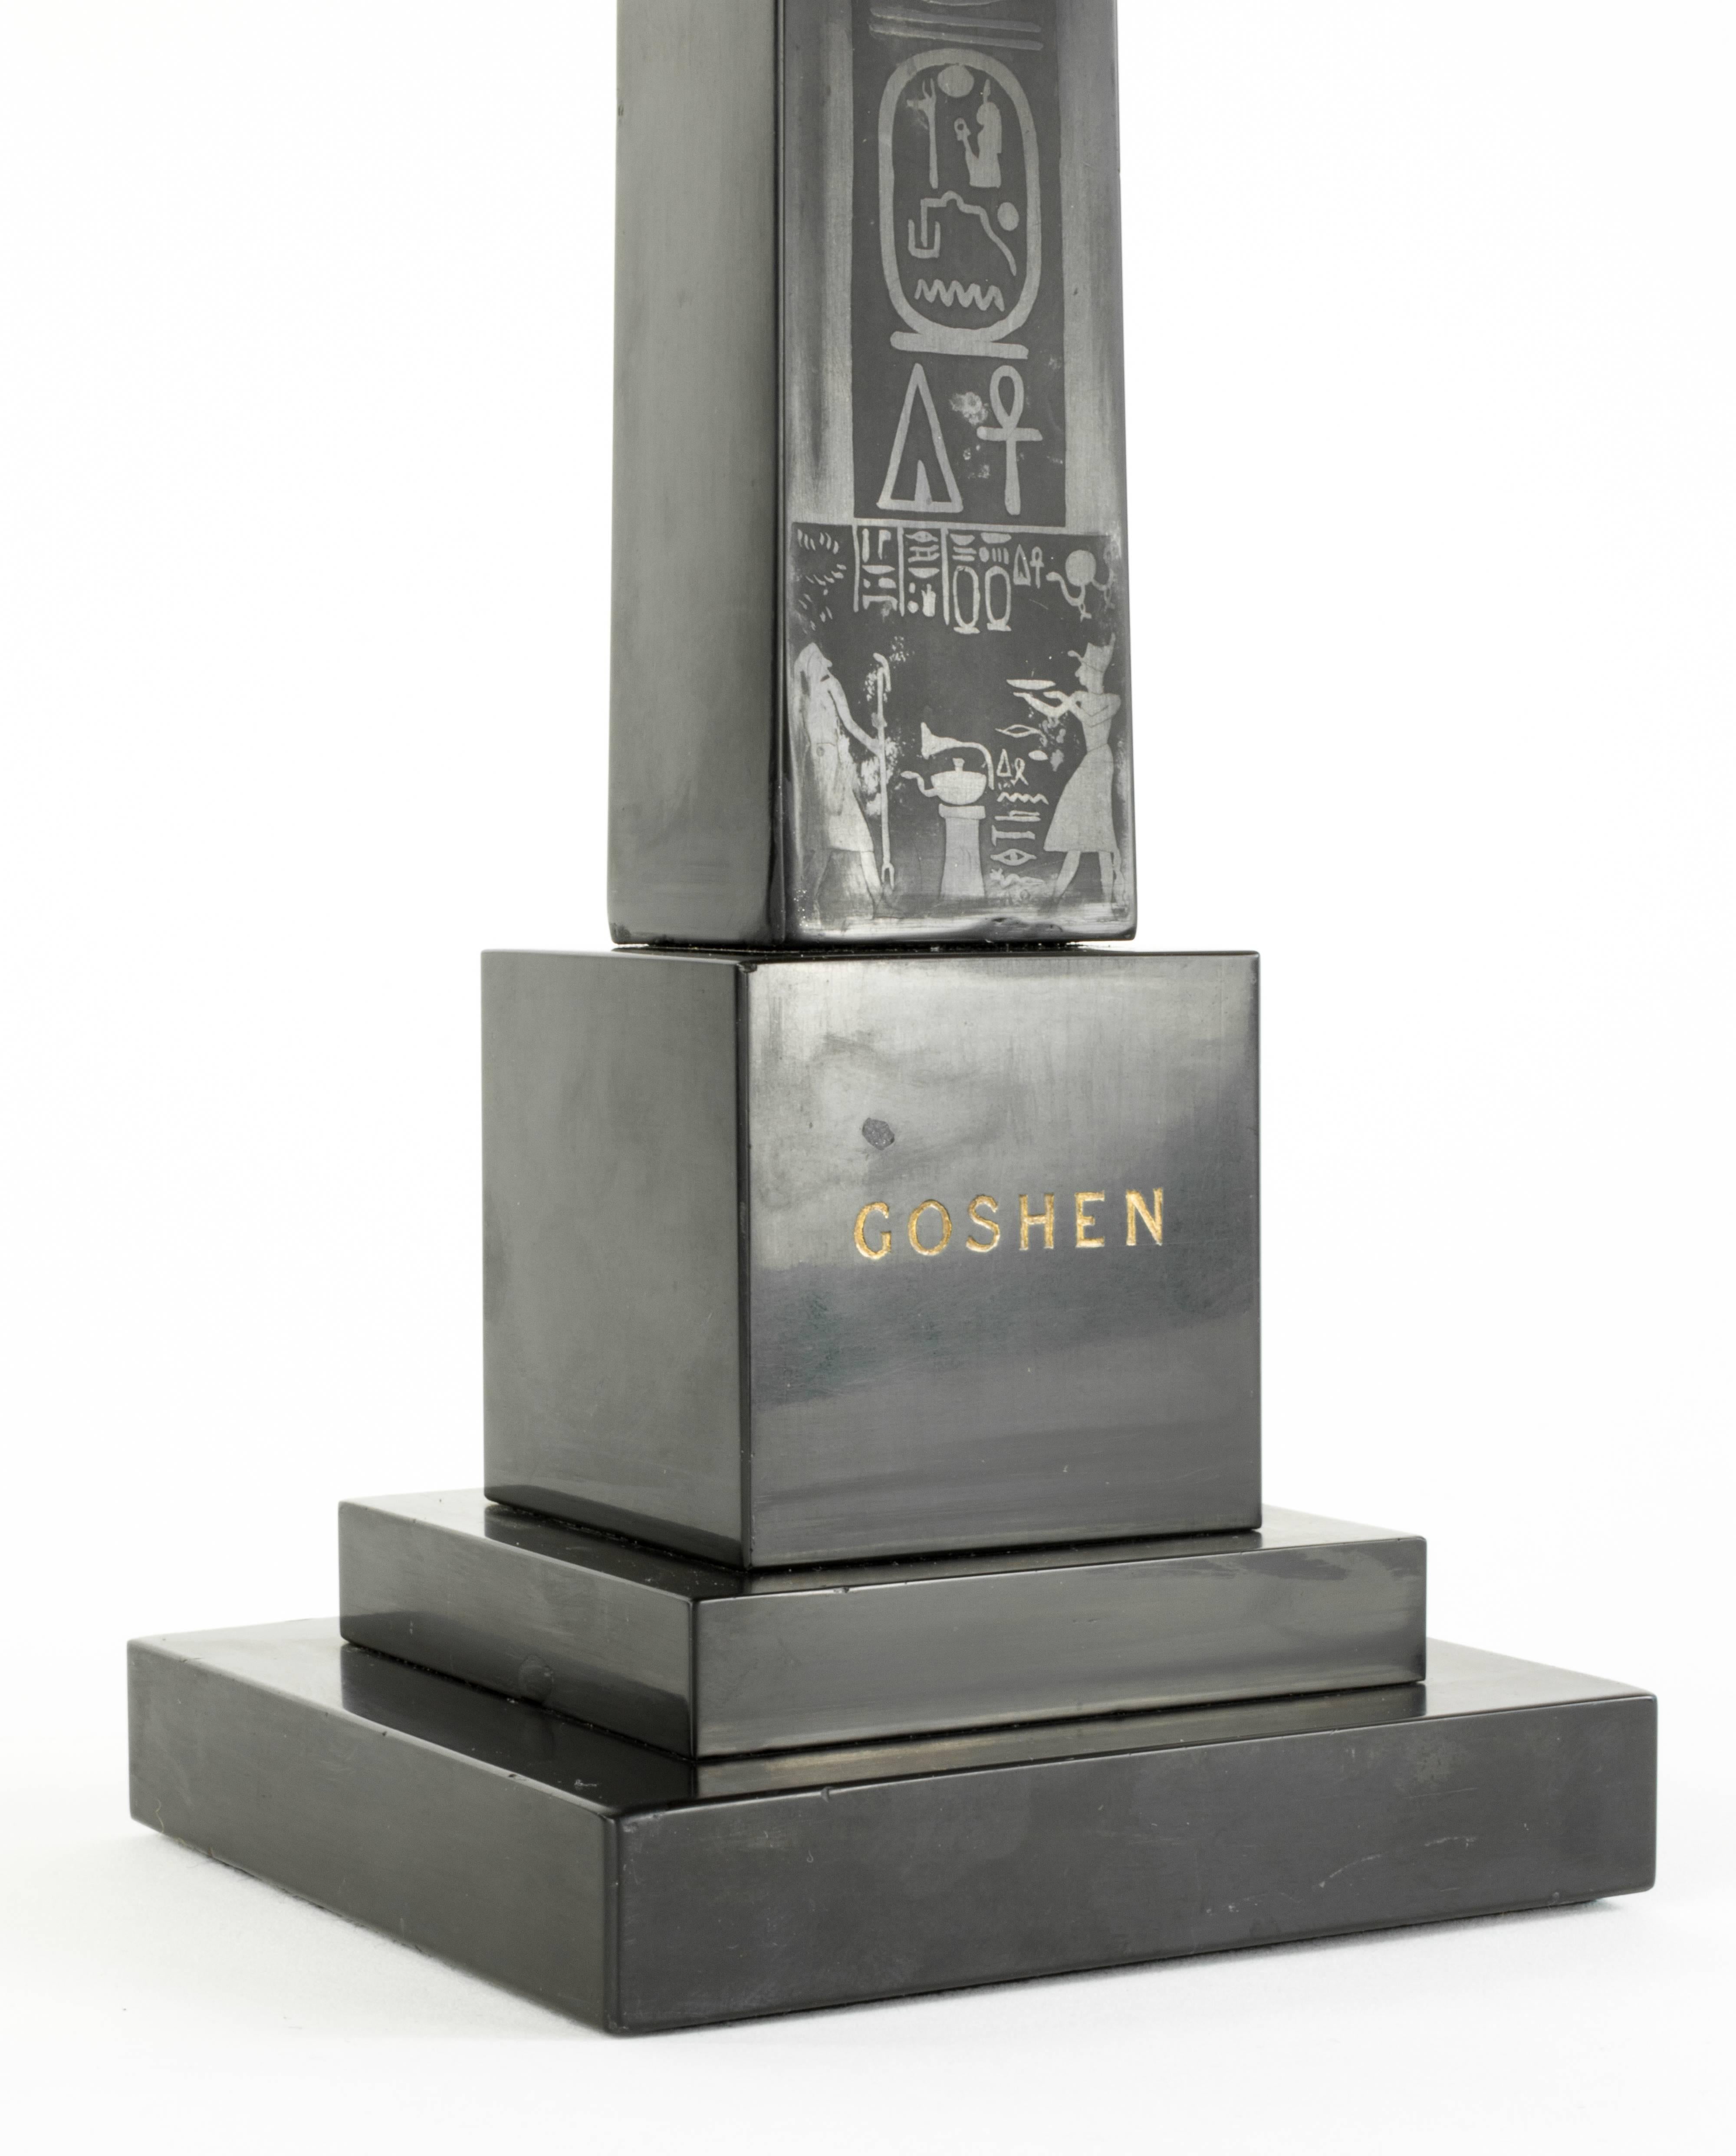 Goshen Obelisk, Egypt 
Ashford Black Marble, 19” h., traces of gilding
1820’s, perhaps by John Mawe

(Possibly best known as the Obelisk erected by Charleton Heston as Moses  in the Ten Commandments)

When we think of black stone models of